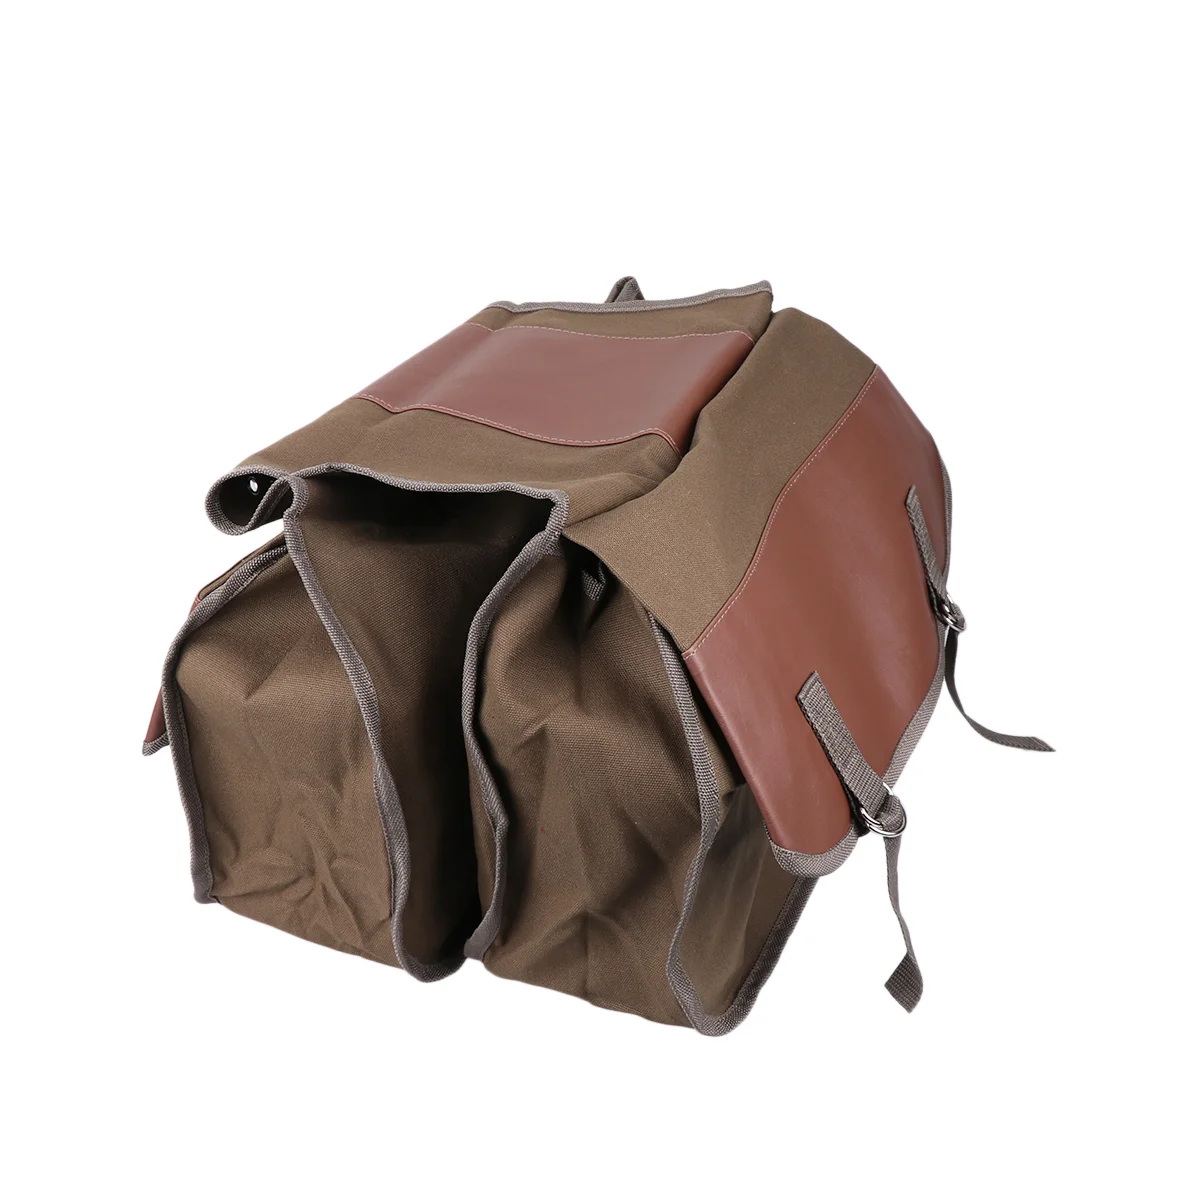 

Double Pouches Mountain Storage Bag Weight Loading Pouch Canvas Organizer for Travel Picnic (Khaki)